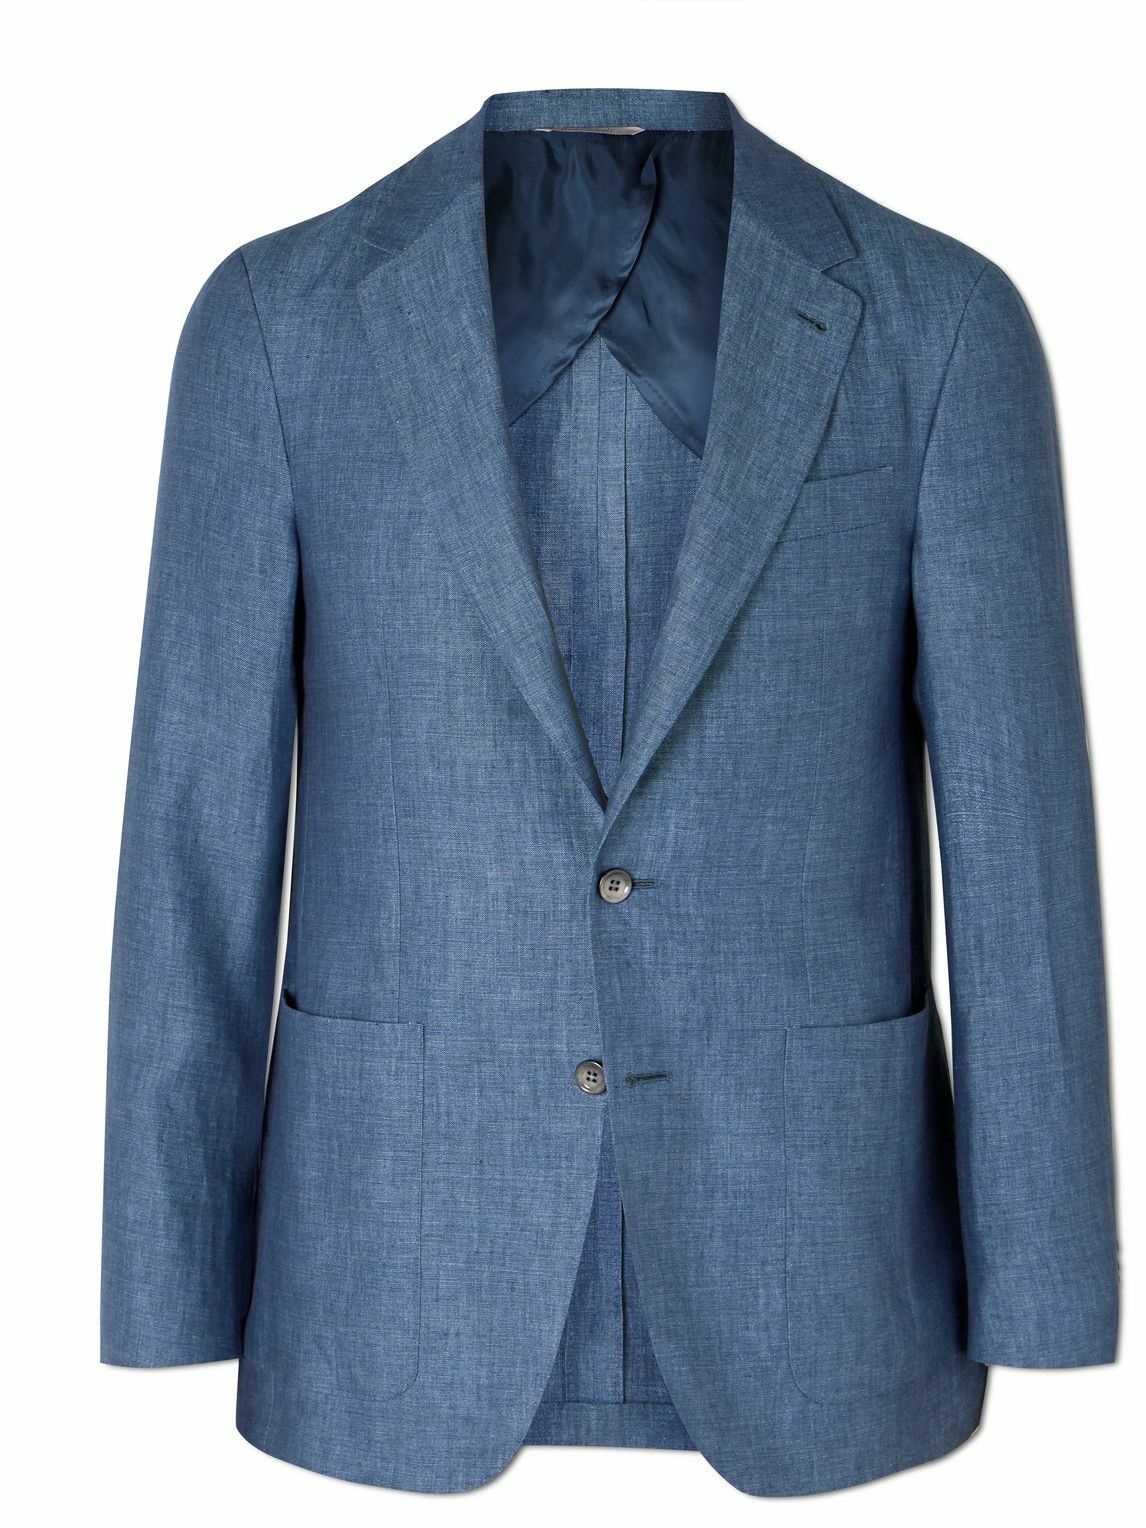 Canali - Unstrctured Linen Suit Jacket - Blue Canali